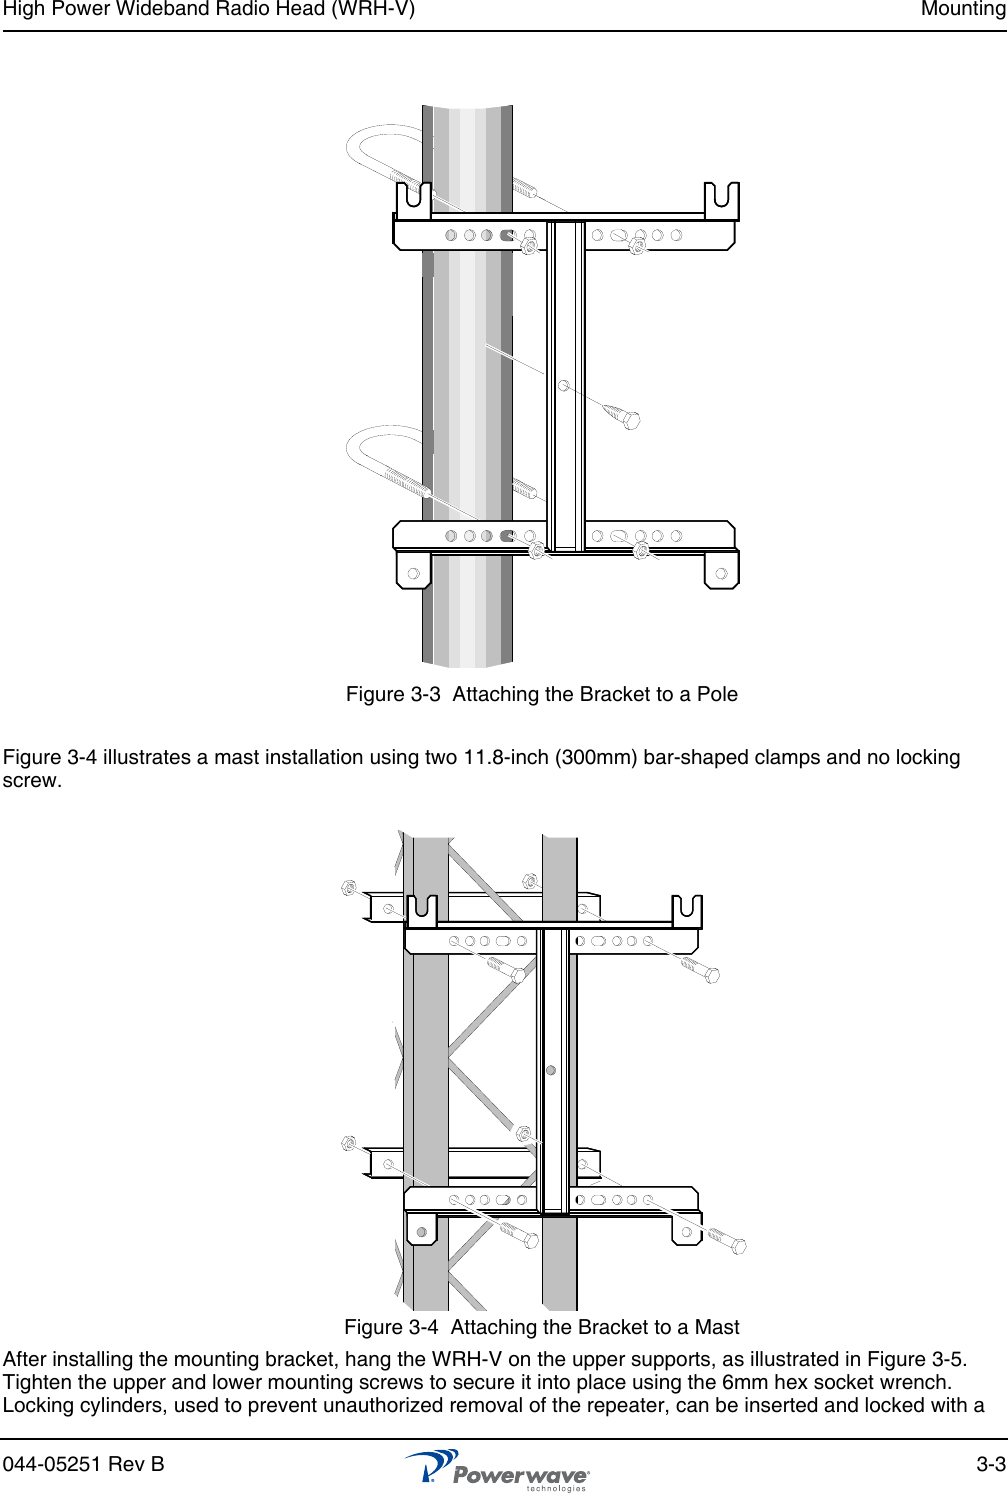 High Power Wideband Radio Head (WRH-V) Mounting044-05251 Rev B 3-3Figure 3-3  Attaching the Bracket to a PoleFigure 3-4 illustrates a mast installation using two 11.8-inch (300mm) bar-shaped clamps and no locking screw.Figure 3-4  Attaching the Bracket to a MastAfter installing the mounting bracket, hang the WRH-V on the upper supports, as illustrated in Figure 3-5. Tighten the upper and lower mounting screws to secure it into place using the 6mm hex socket wrench. Locking cylinders, used to prevent unauthorized removal of the repeater, can be inserted and locked with a 